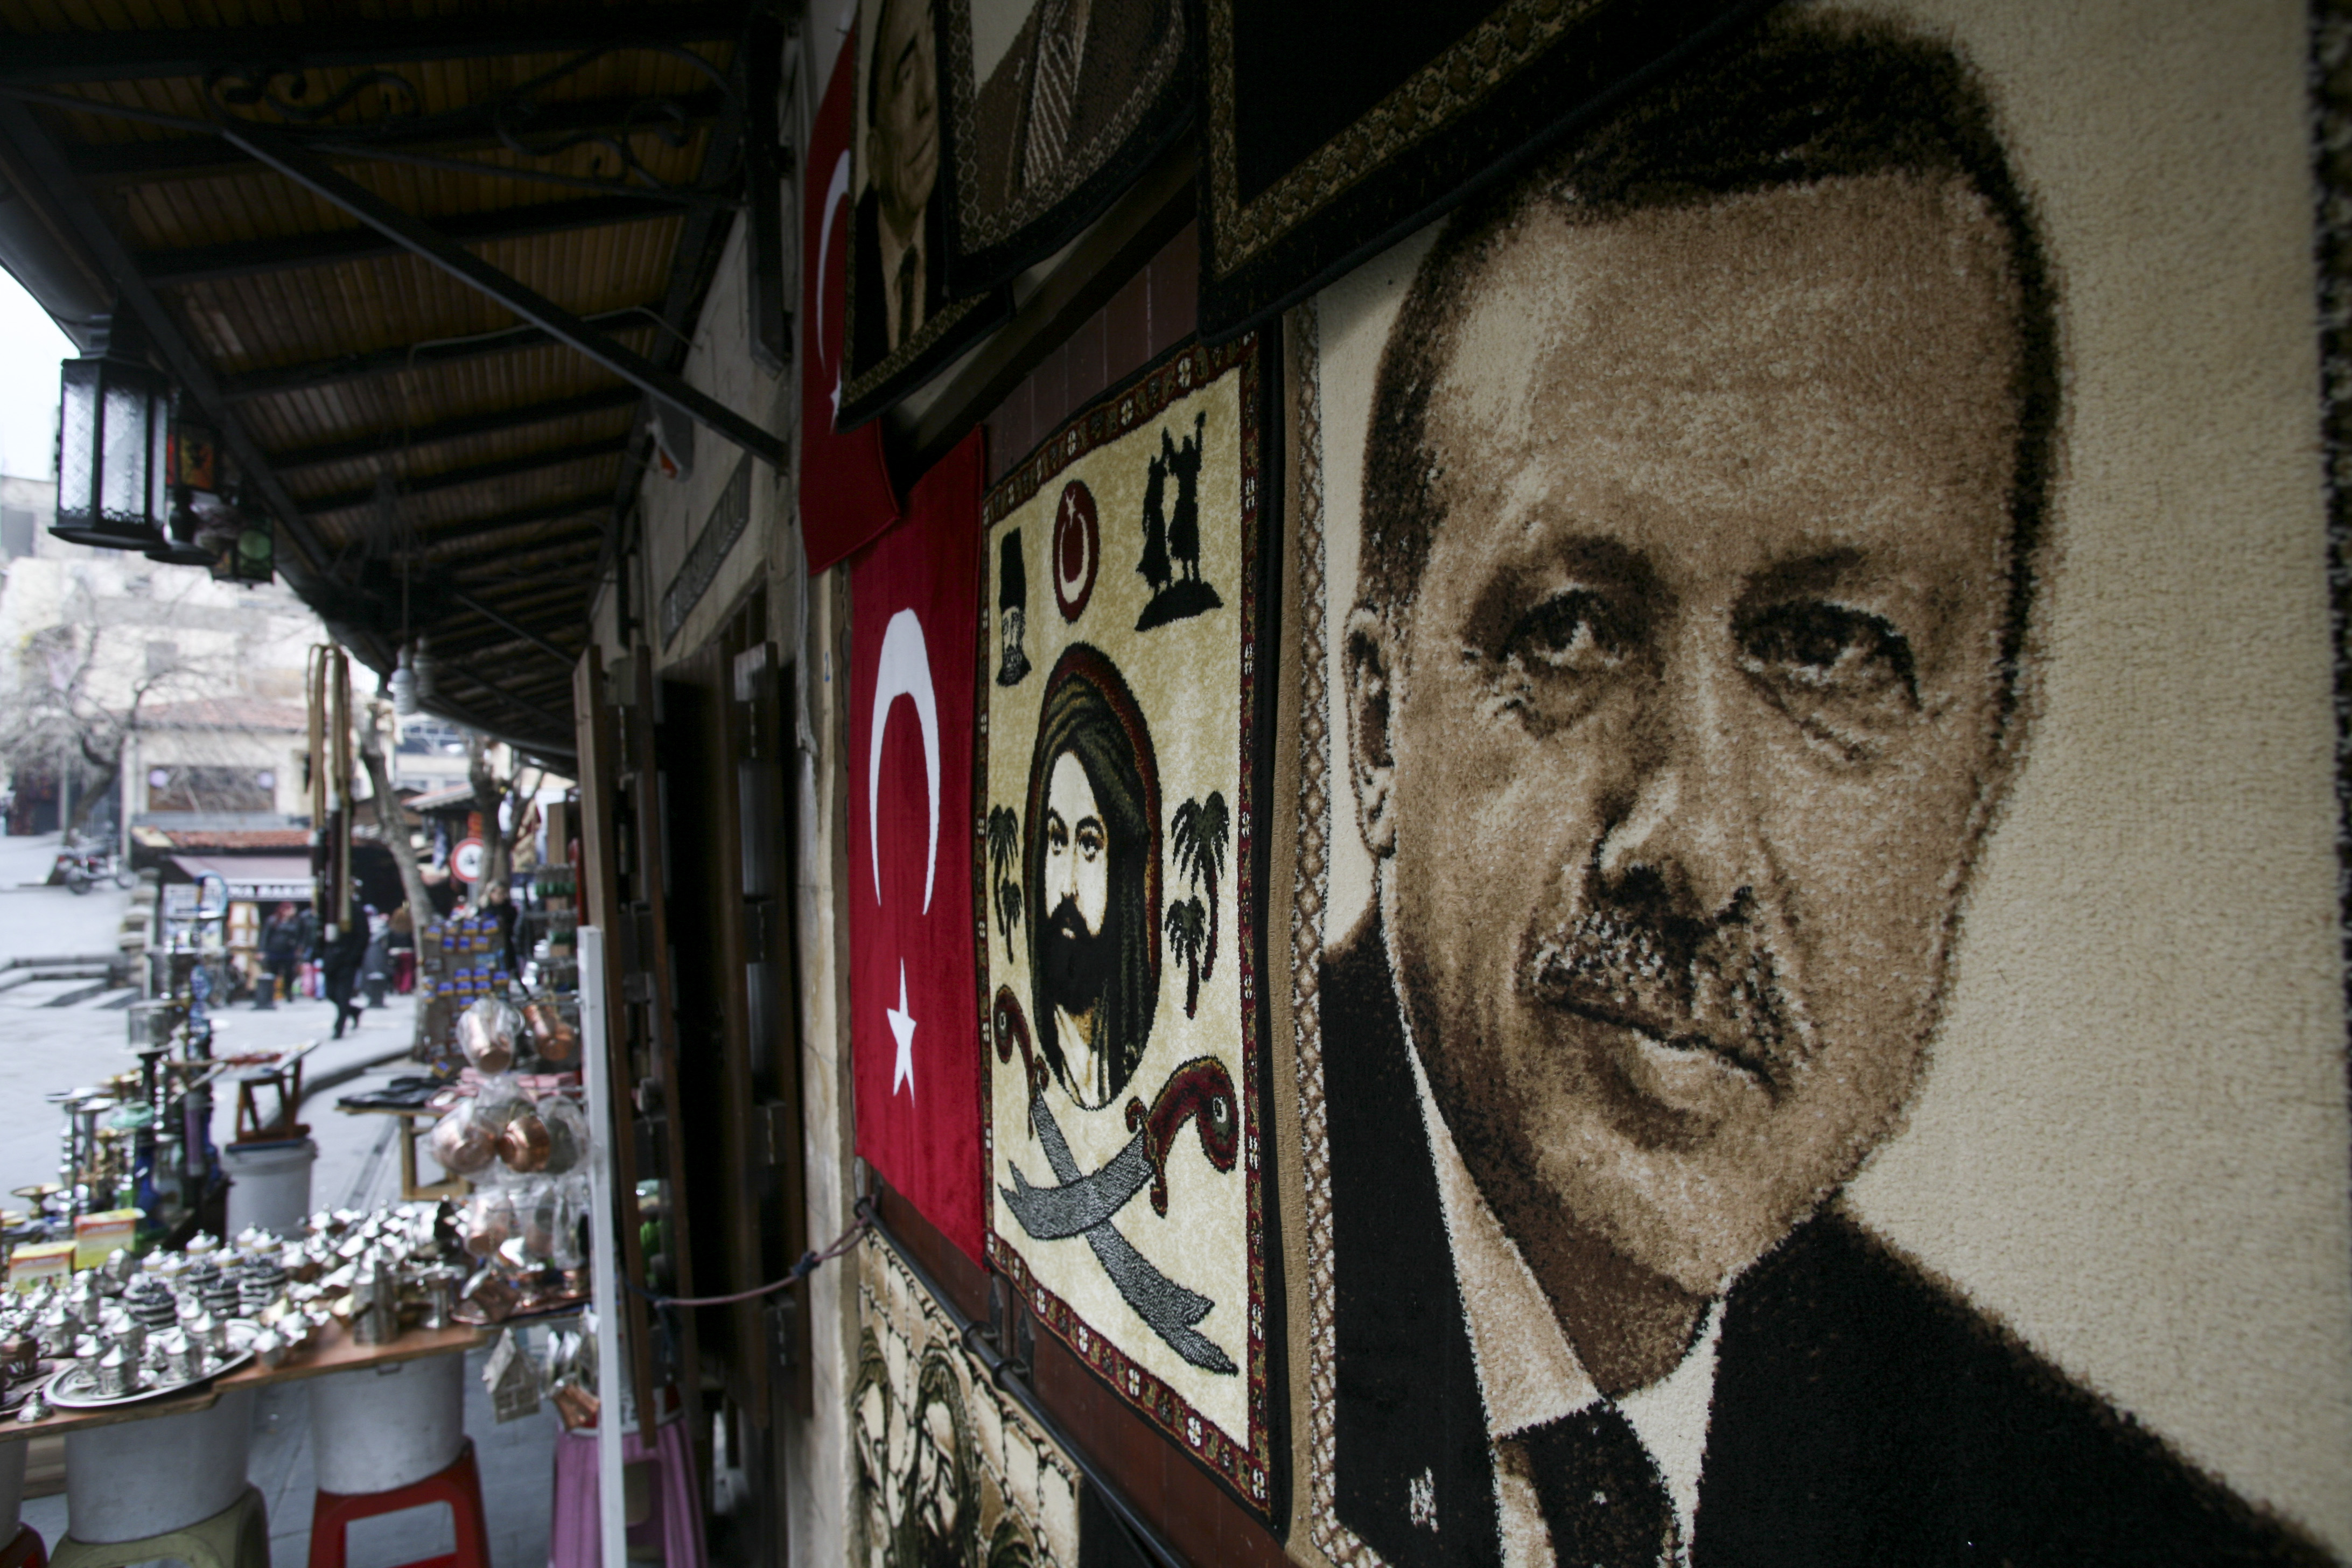 A rug featuring Turkish President Erdoğan's portrait for sale in Gaziantep, 2014. Photo by author.